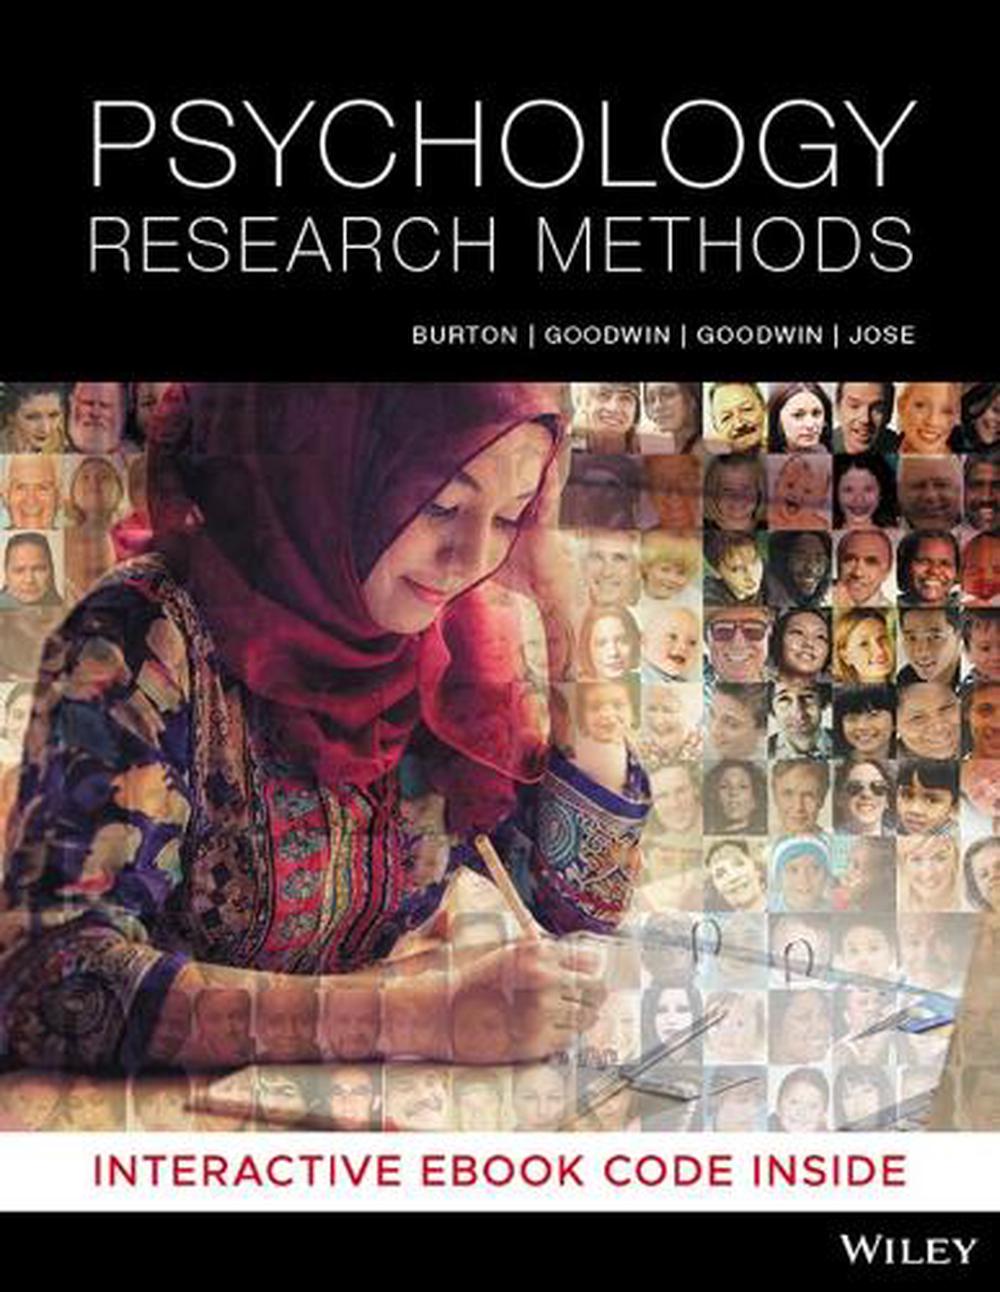 articles about psychological research methods